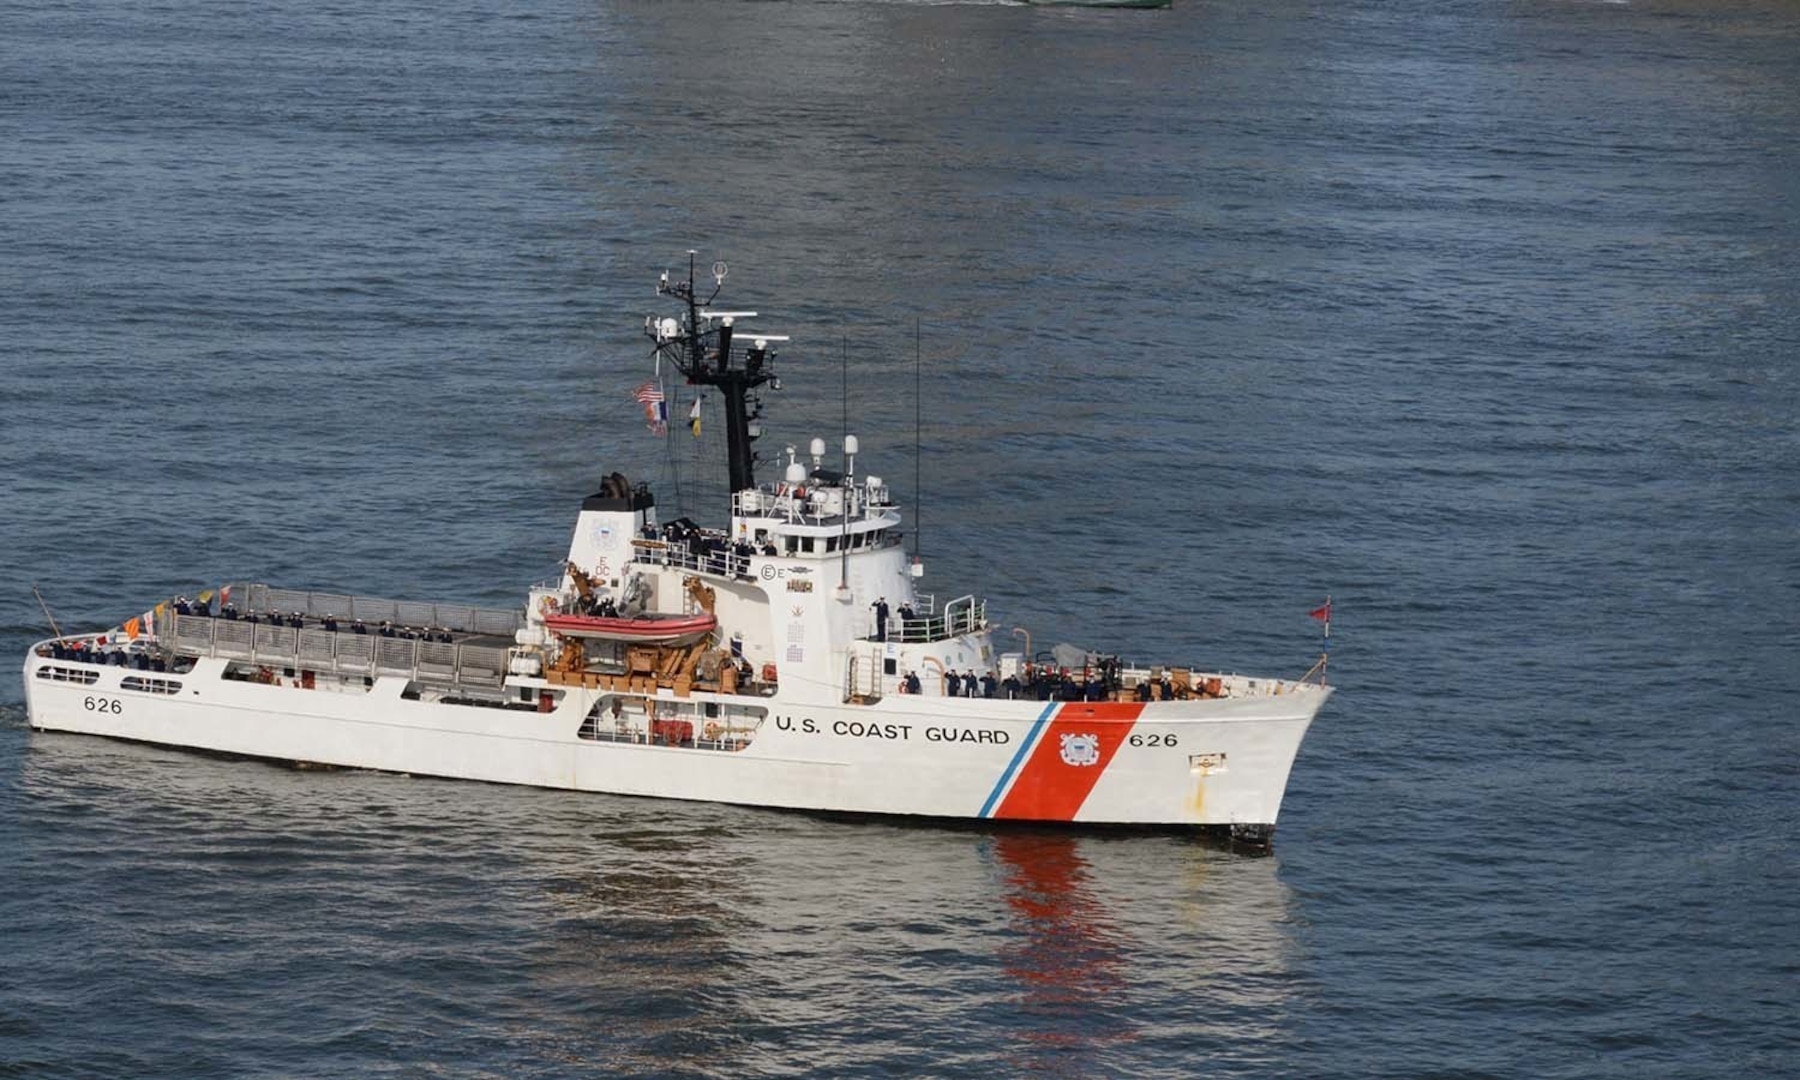 NEW YORK (May 25, 2022) U.S. Coast Guard Cutter Dependable (WMEC-626) participates in the Parade of Ships kicking off Fleet Week New York 2022. Fleet Week New York, now in its 34th year, is the city's time-honored celebration of the sea services. It is an unparalleled opportunity for the citizens of New York and surrounding tri-state area to meet Sailors, Marines and Coast Guardsmen and witness first hand the latest capabilities of today’s maritime services. The weeklong celebration has been held nearly every year since 1984 and will host nearly 3,000 Sailors, Marines and Coast Guardsmen this year. (U.S. Navy photo by Mass Communication Specialist 3rd Class Maurice Brown)